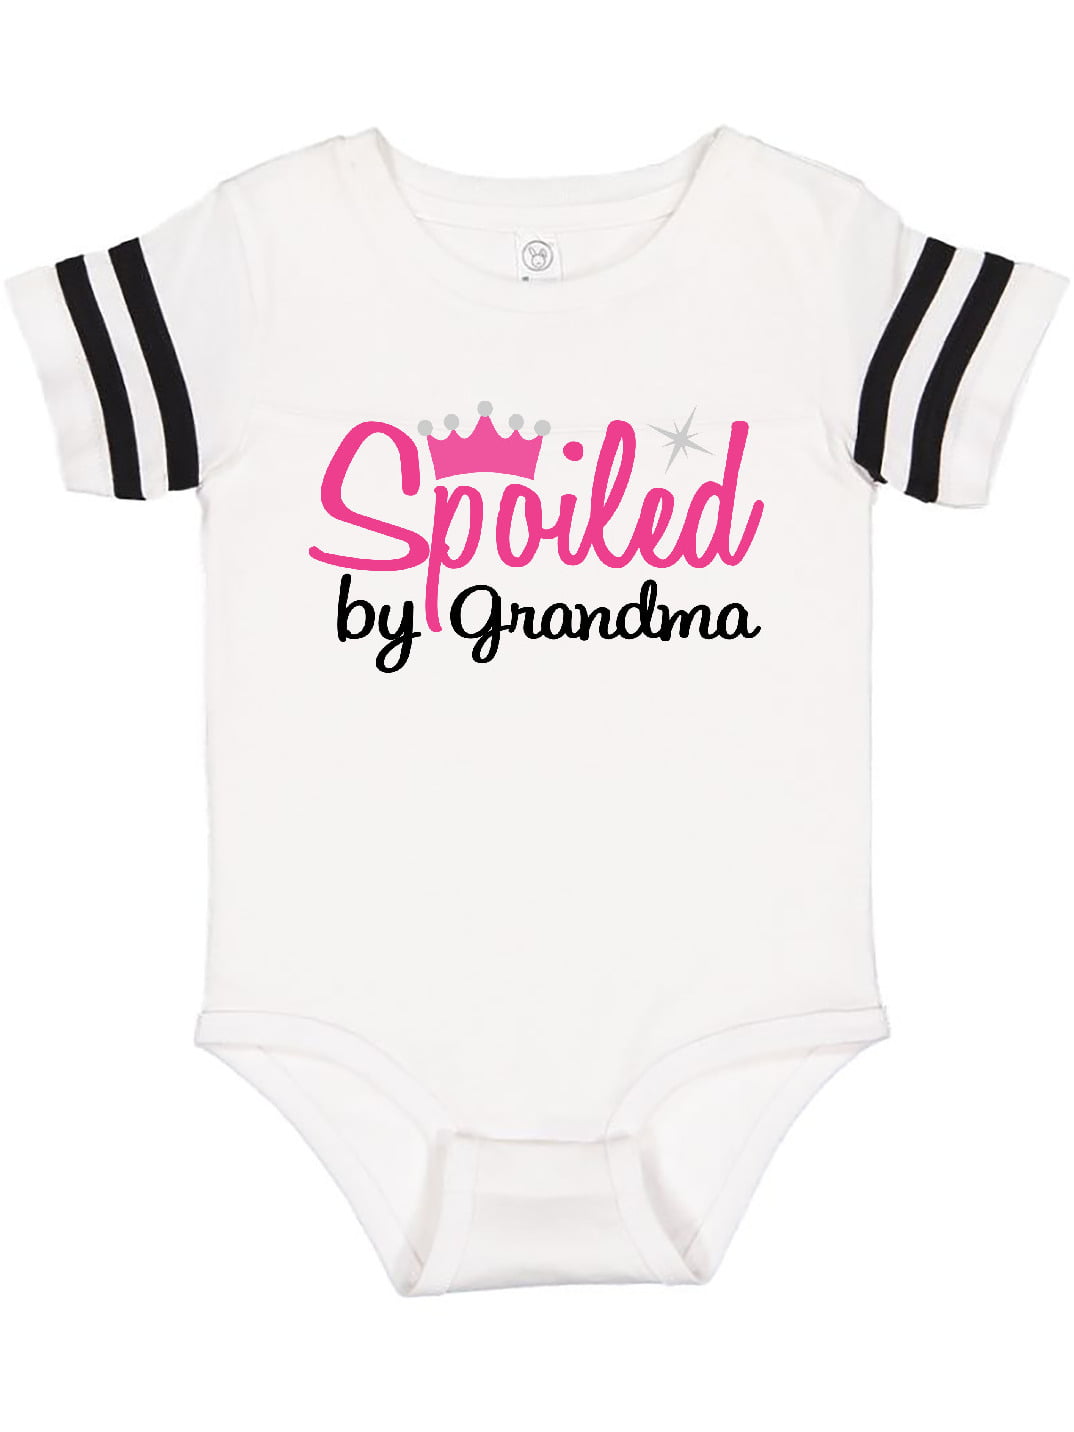 Baby Girls 3-6 Months Luvable Friends Tee Top Spoiled By Grandma Infant T-Shirt 